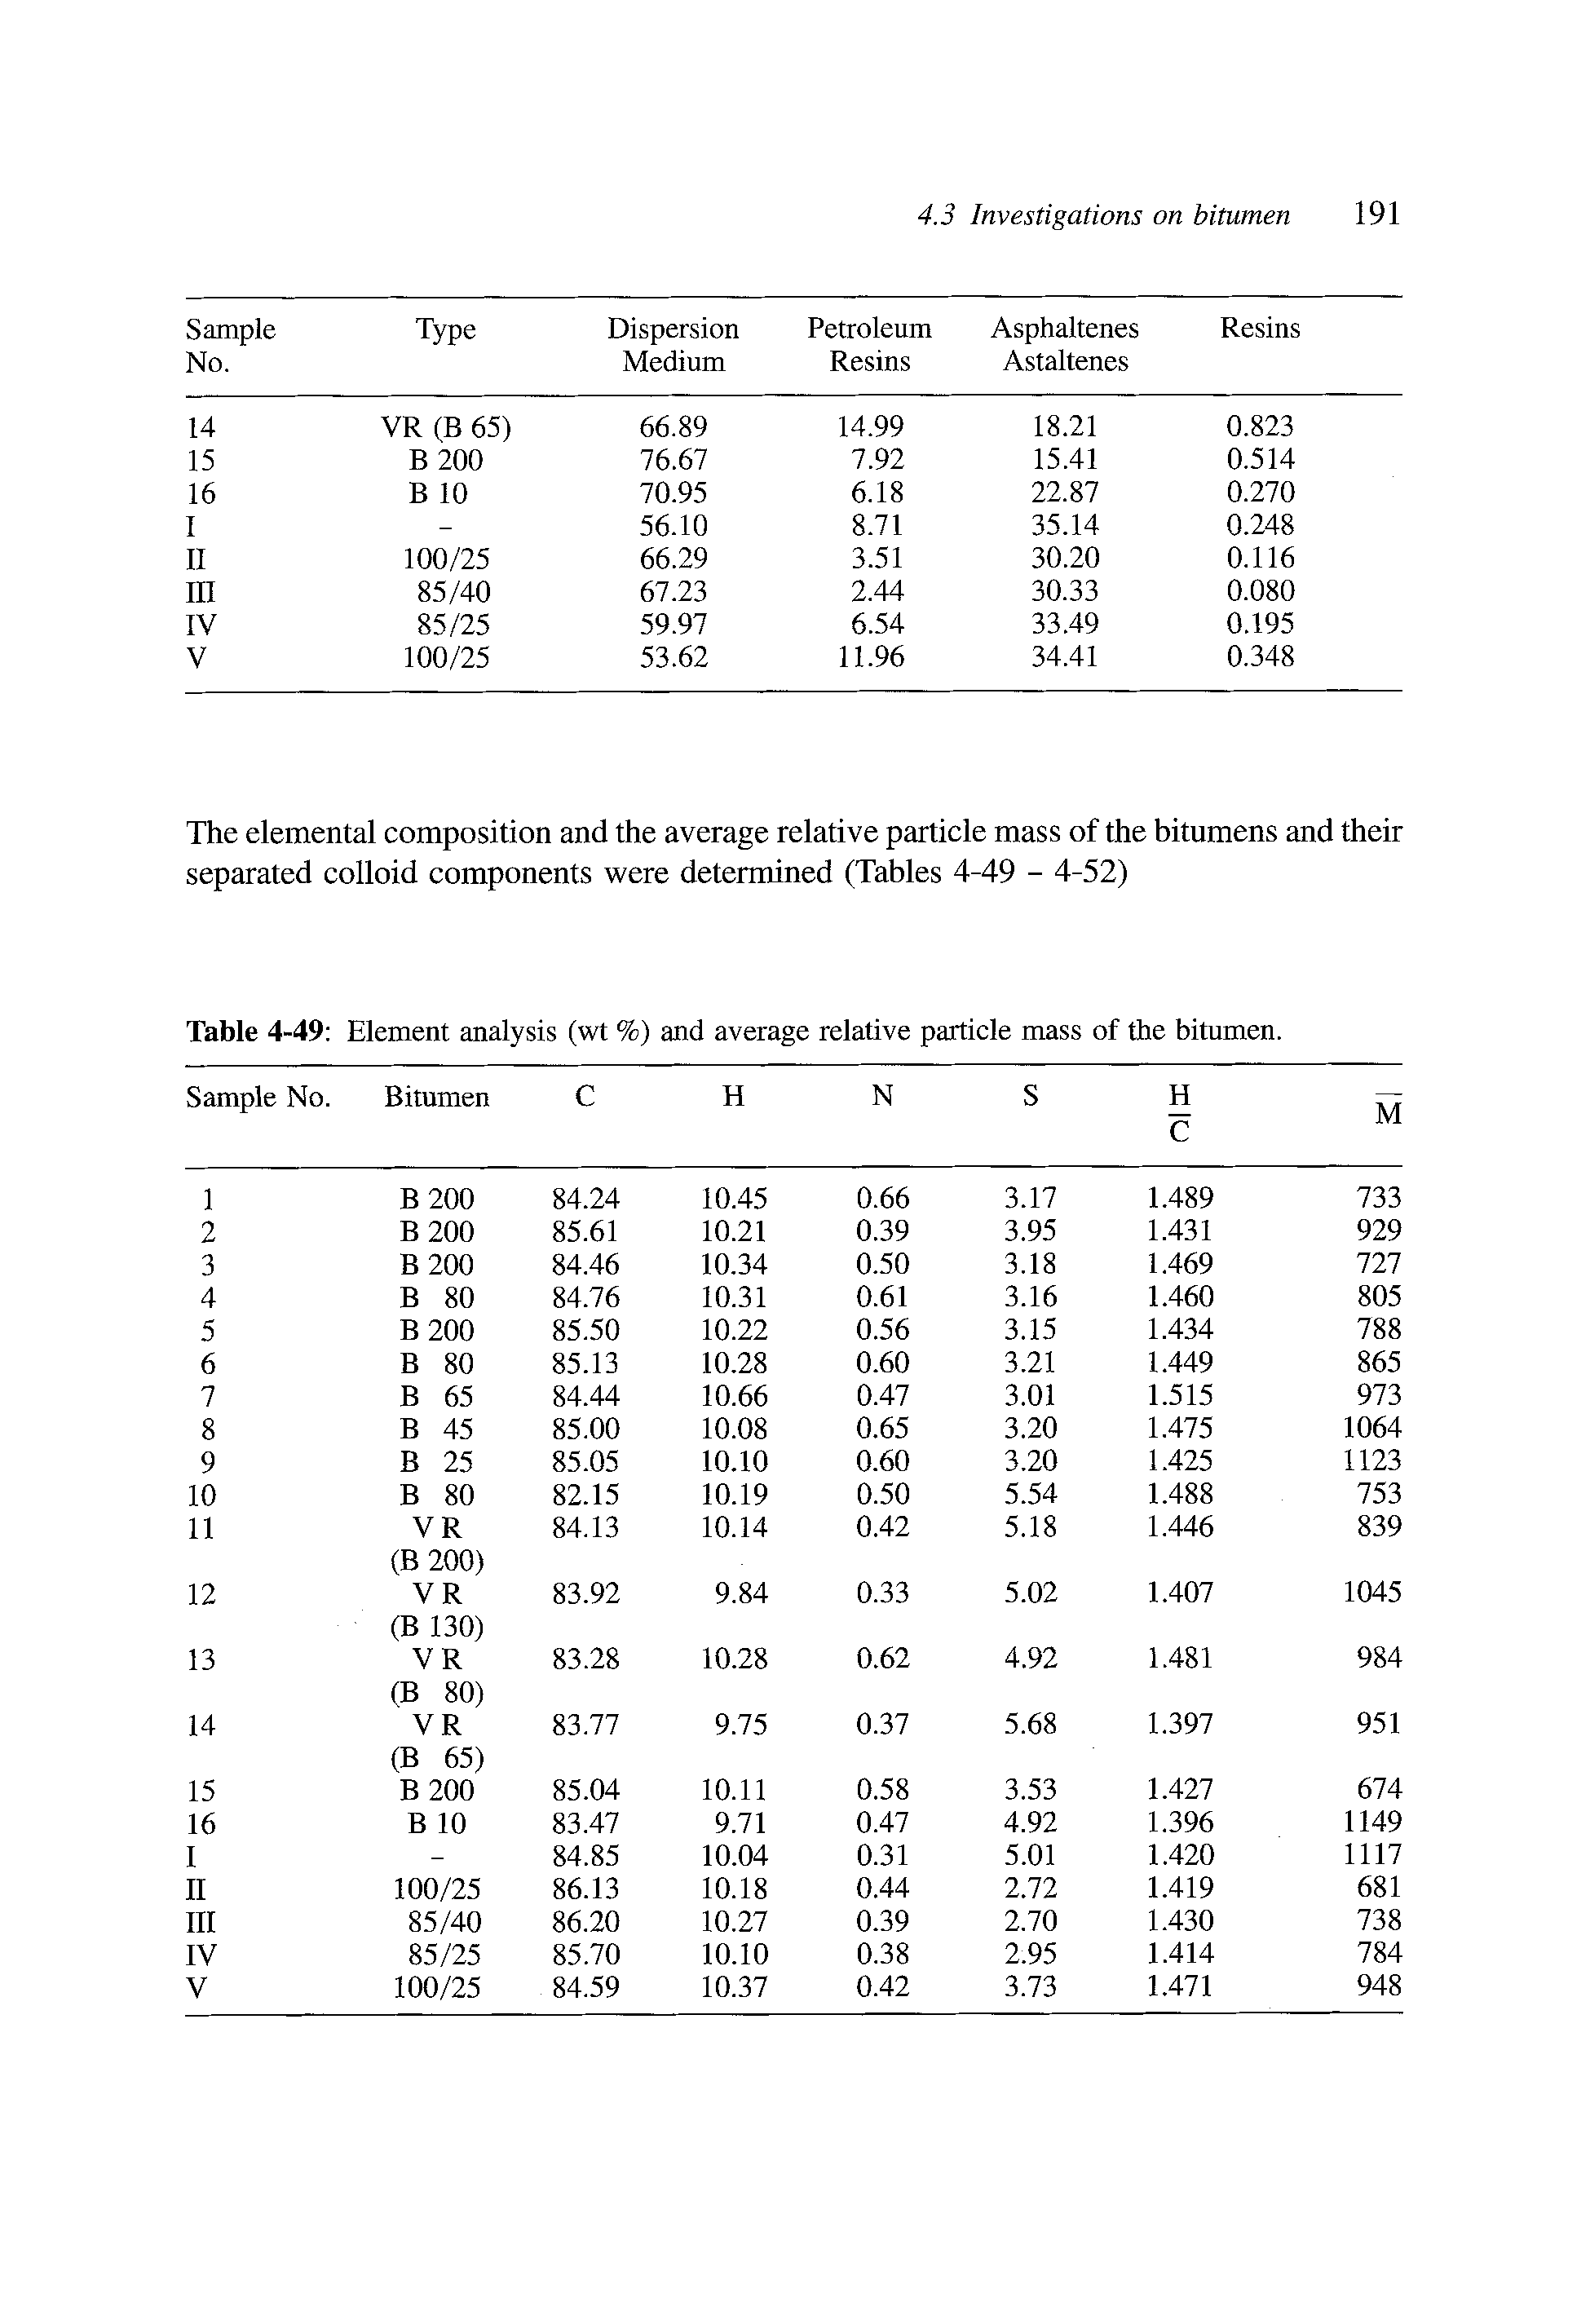 Table 4-49 Element analysis (wt %) and average relative particle mass of the bitumen.